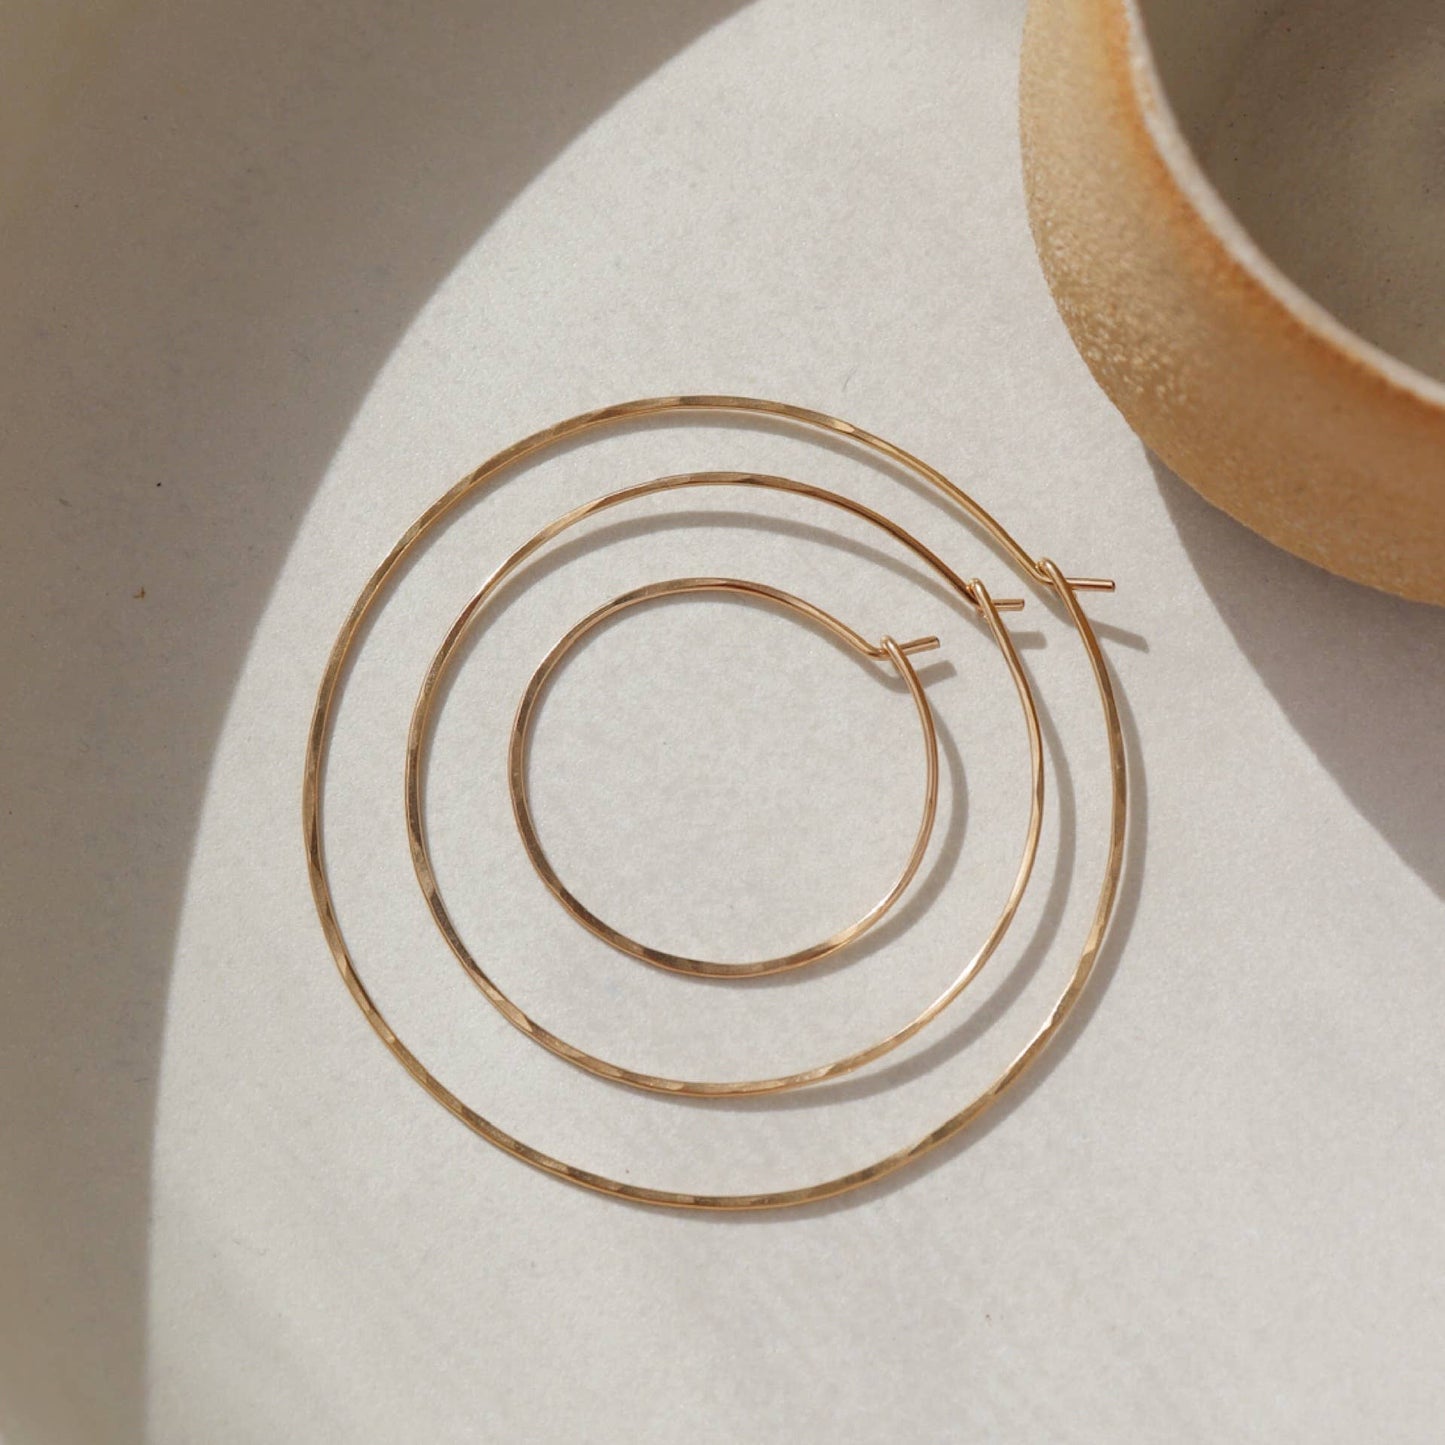 Token Jewelry | Organic Hoops - 14k Gold Fill / Large